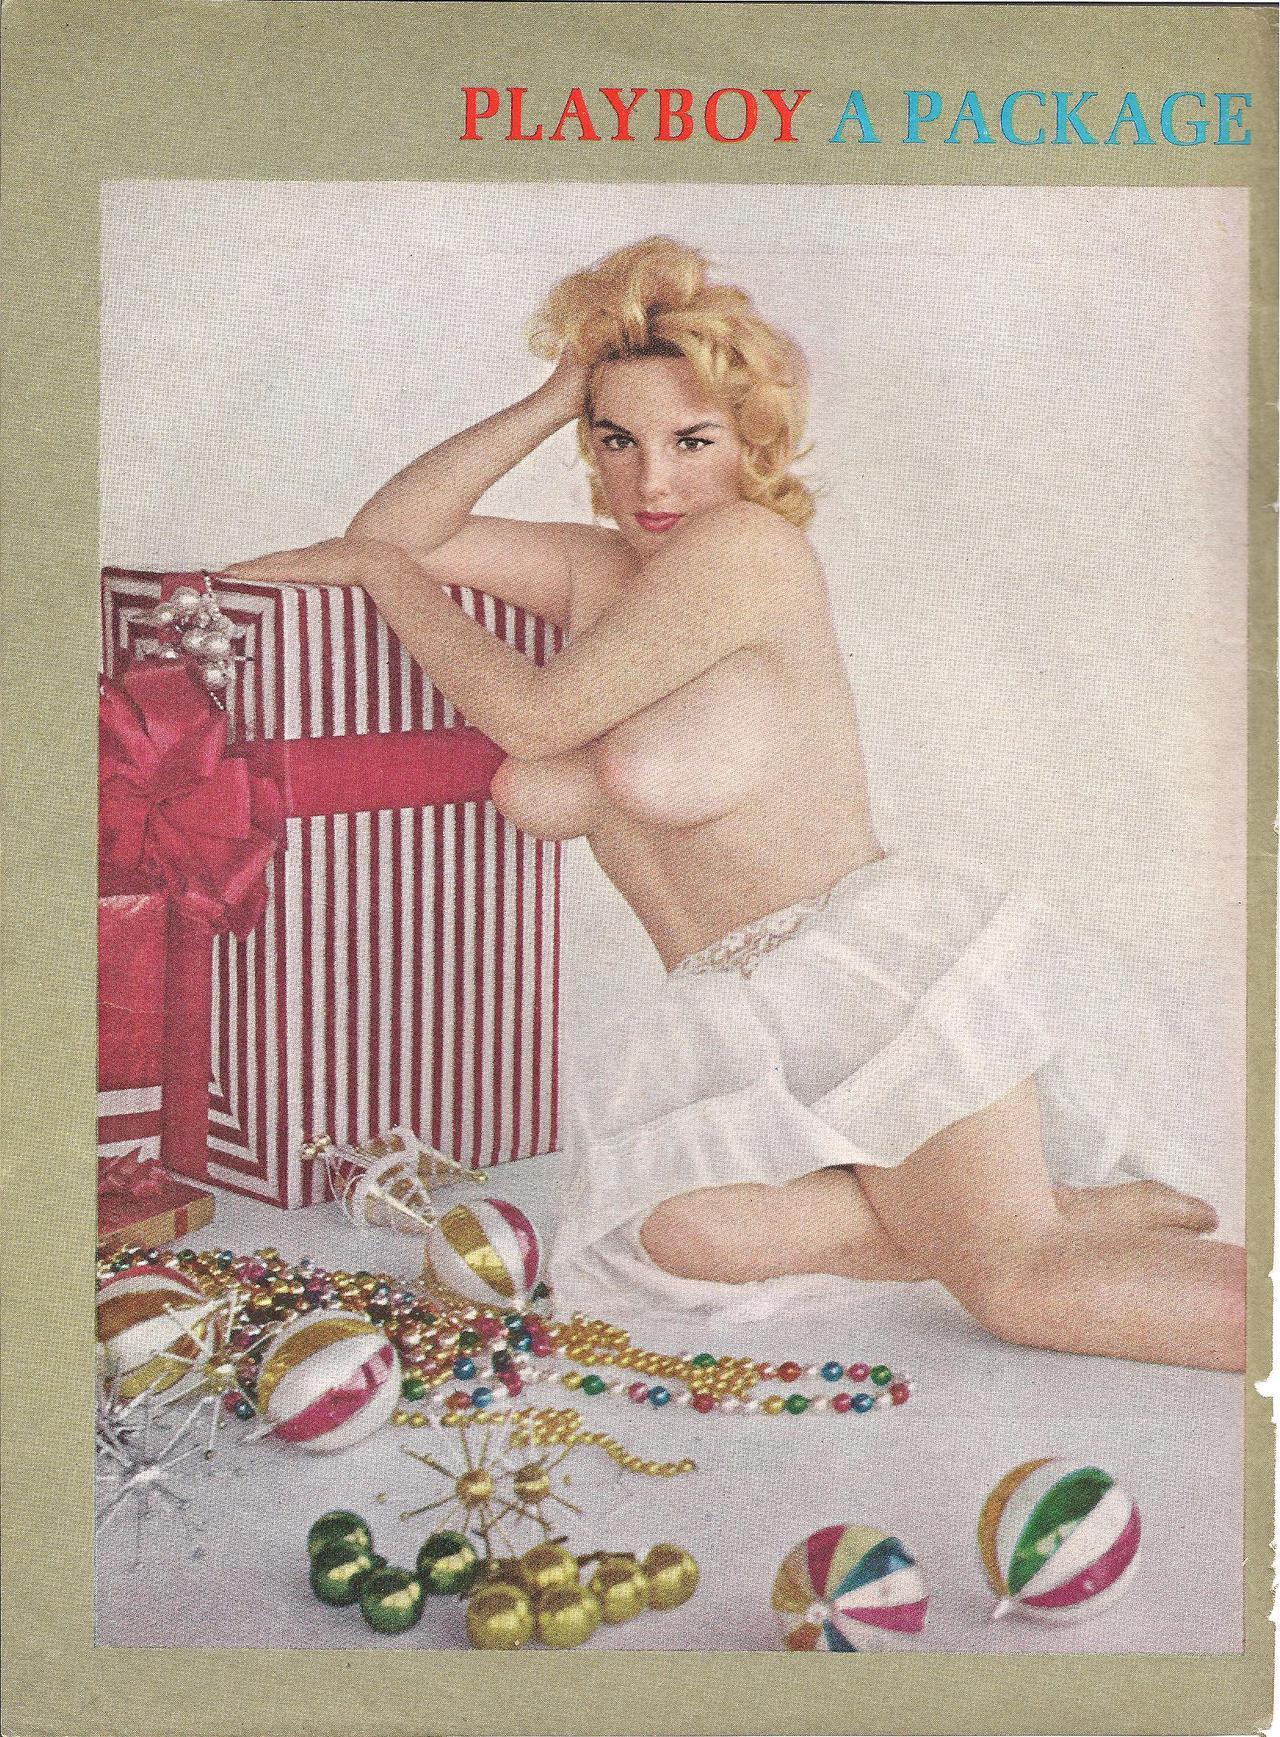 vintagebounty:  Playboy Christmas Pin-Up 1963 Vintage Ad “Playboy: A Package”